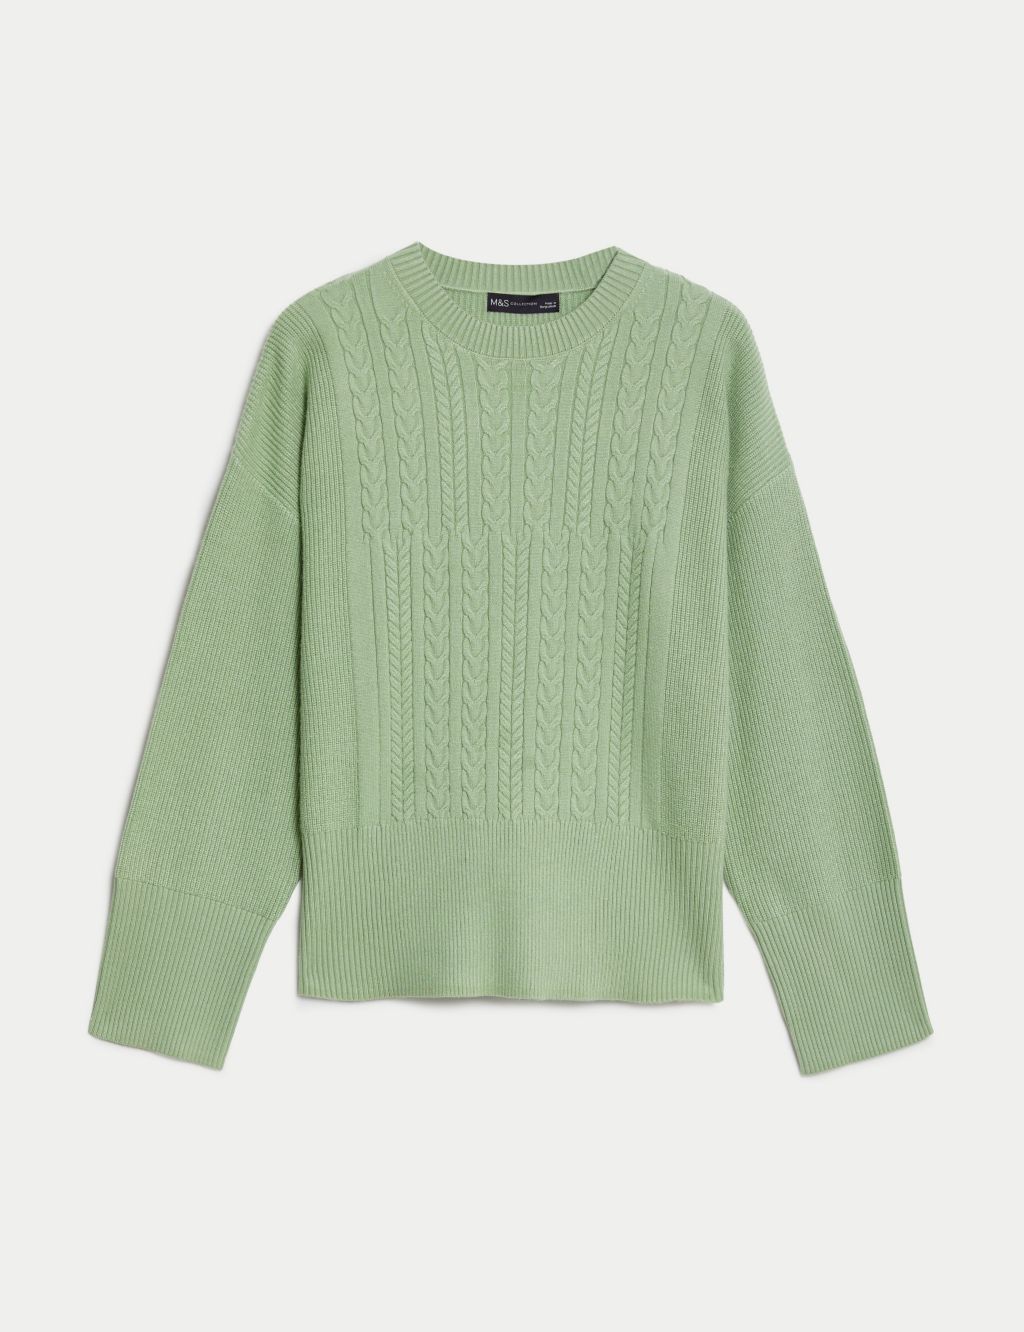 Soft Touch Textured Crew Neck Jumper image 2